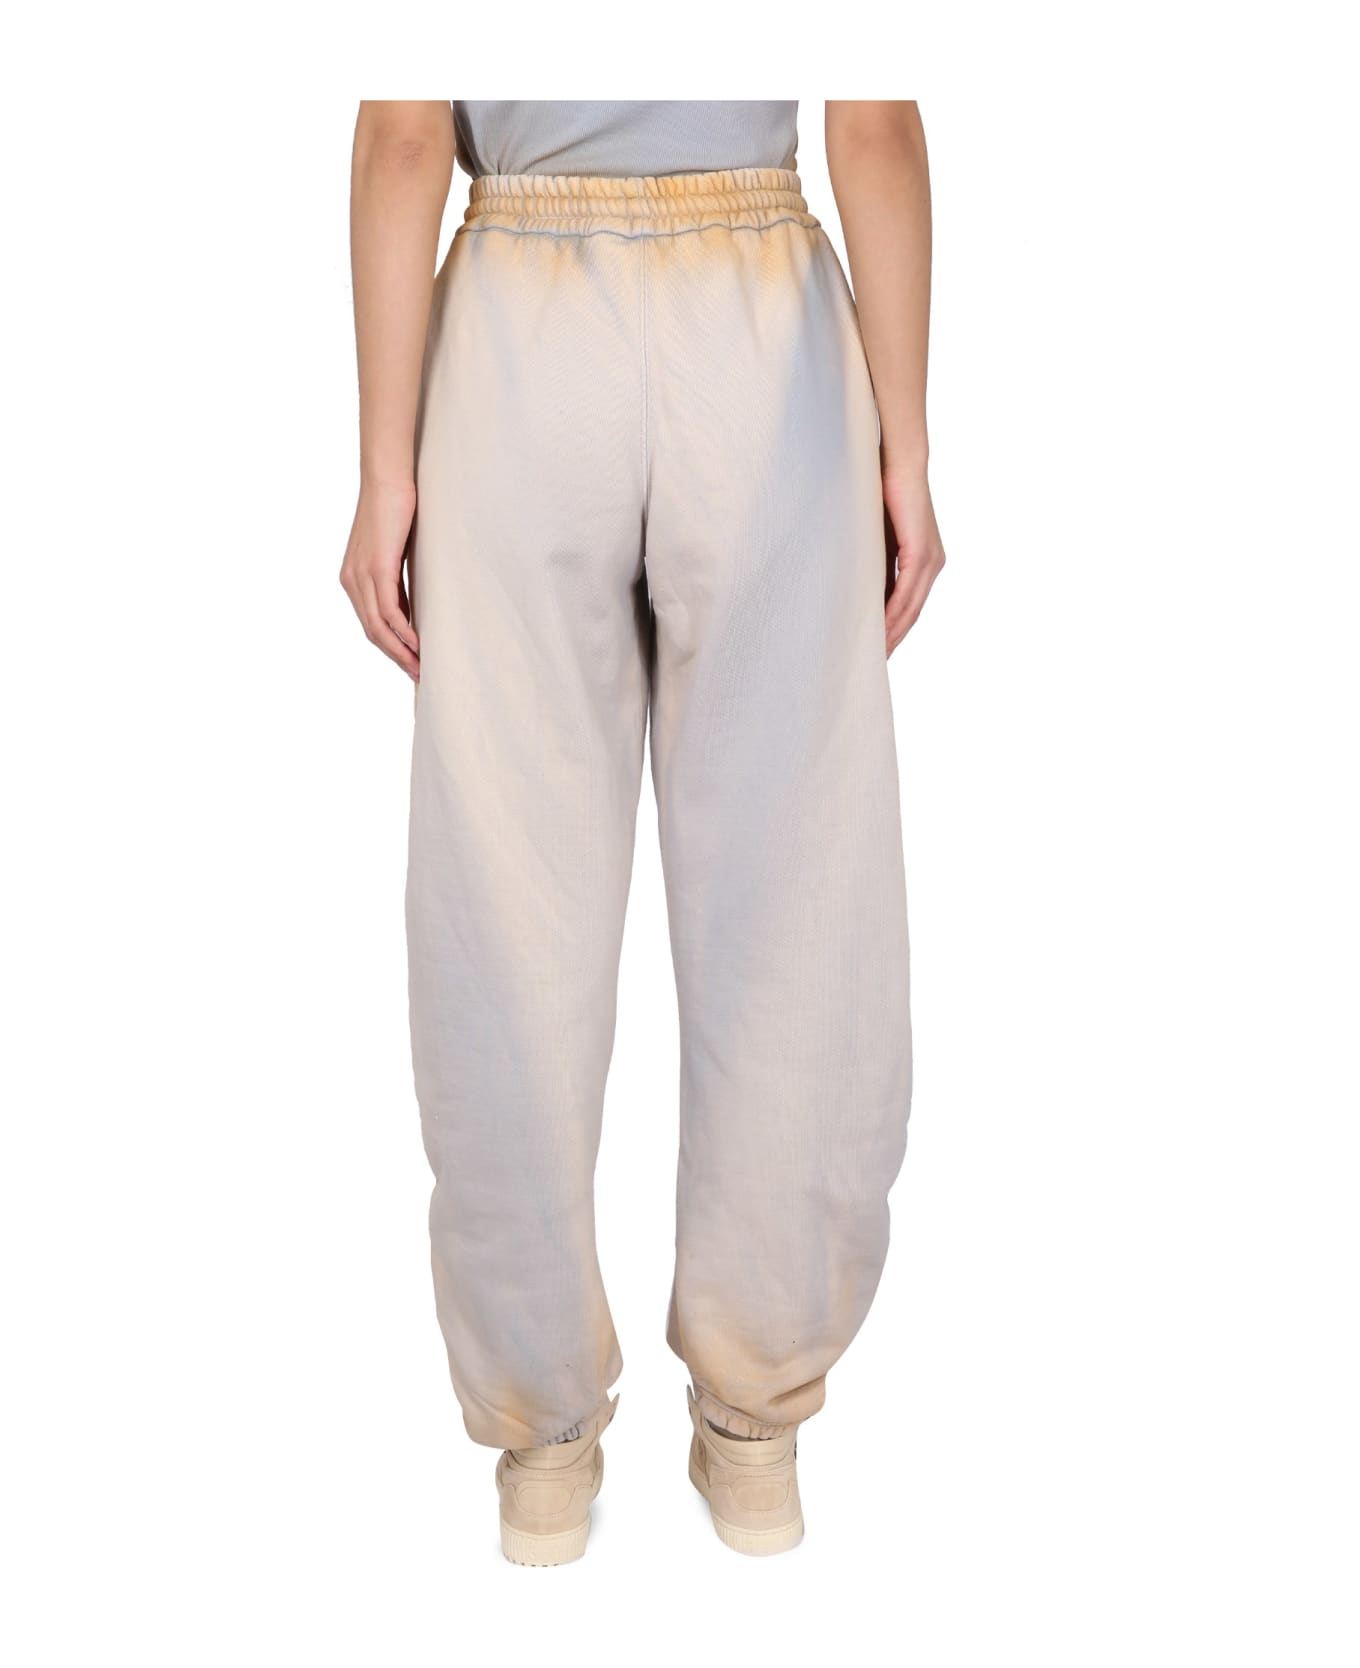 Off-White Twisted Laundry Pant - BEIGE